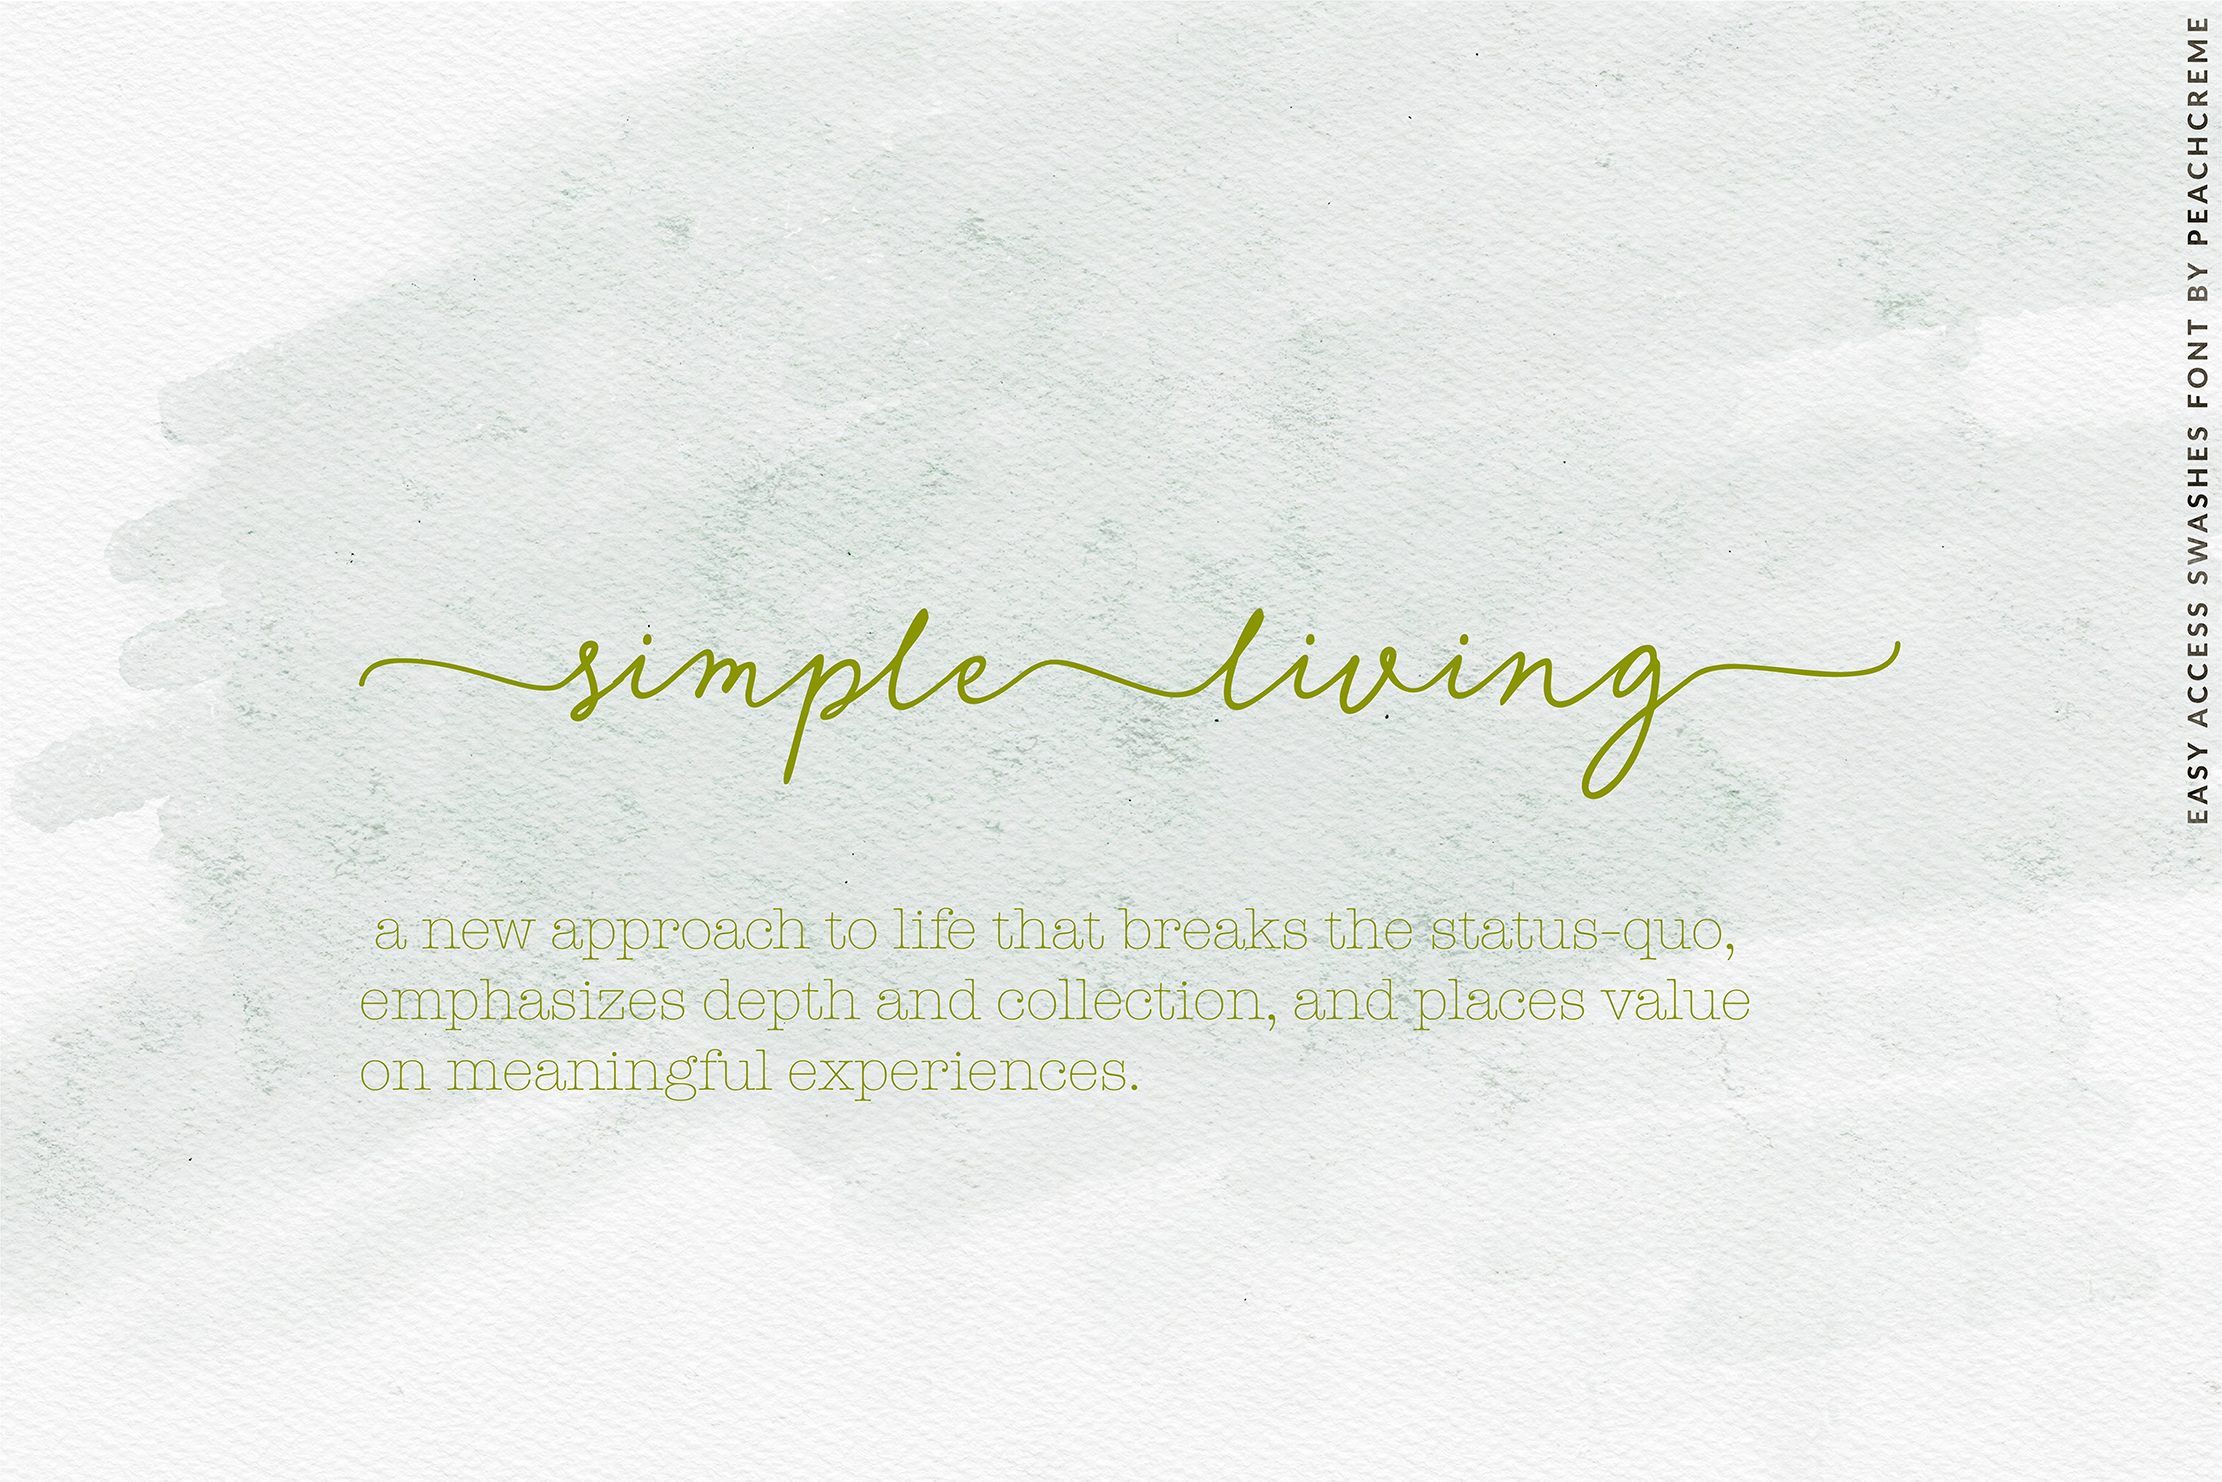 Petite Kisses// Easy access swashes font!